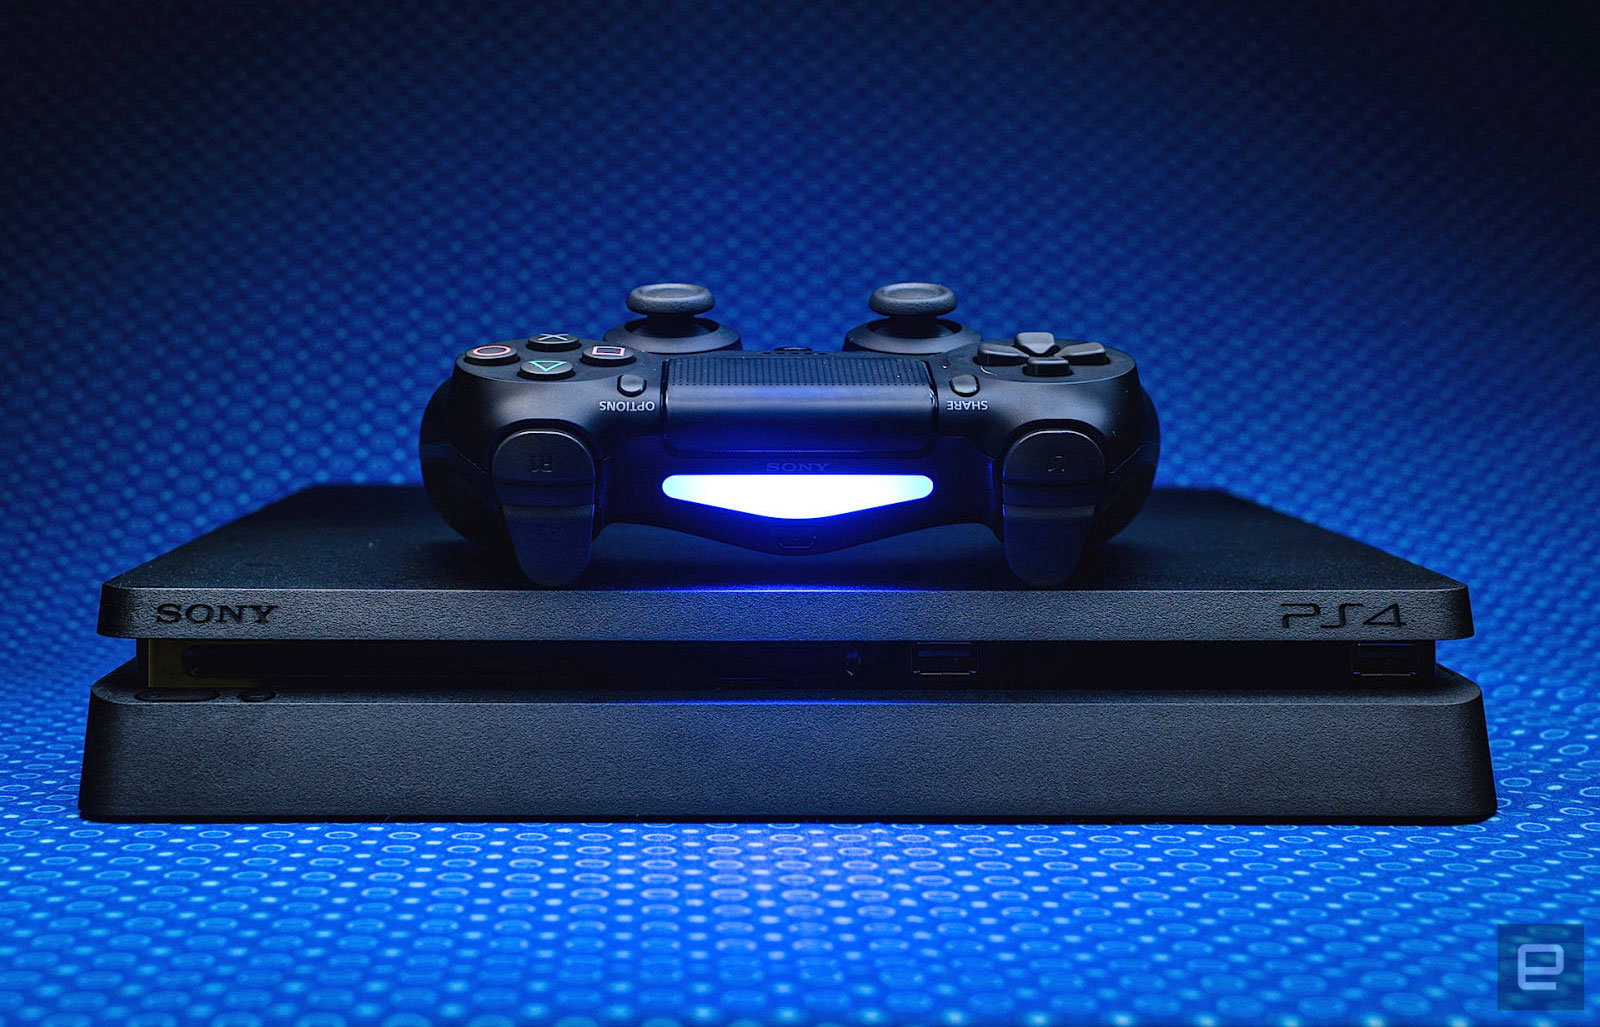 sony ps4 online